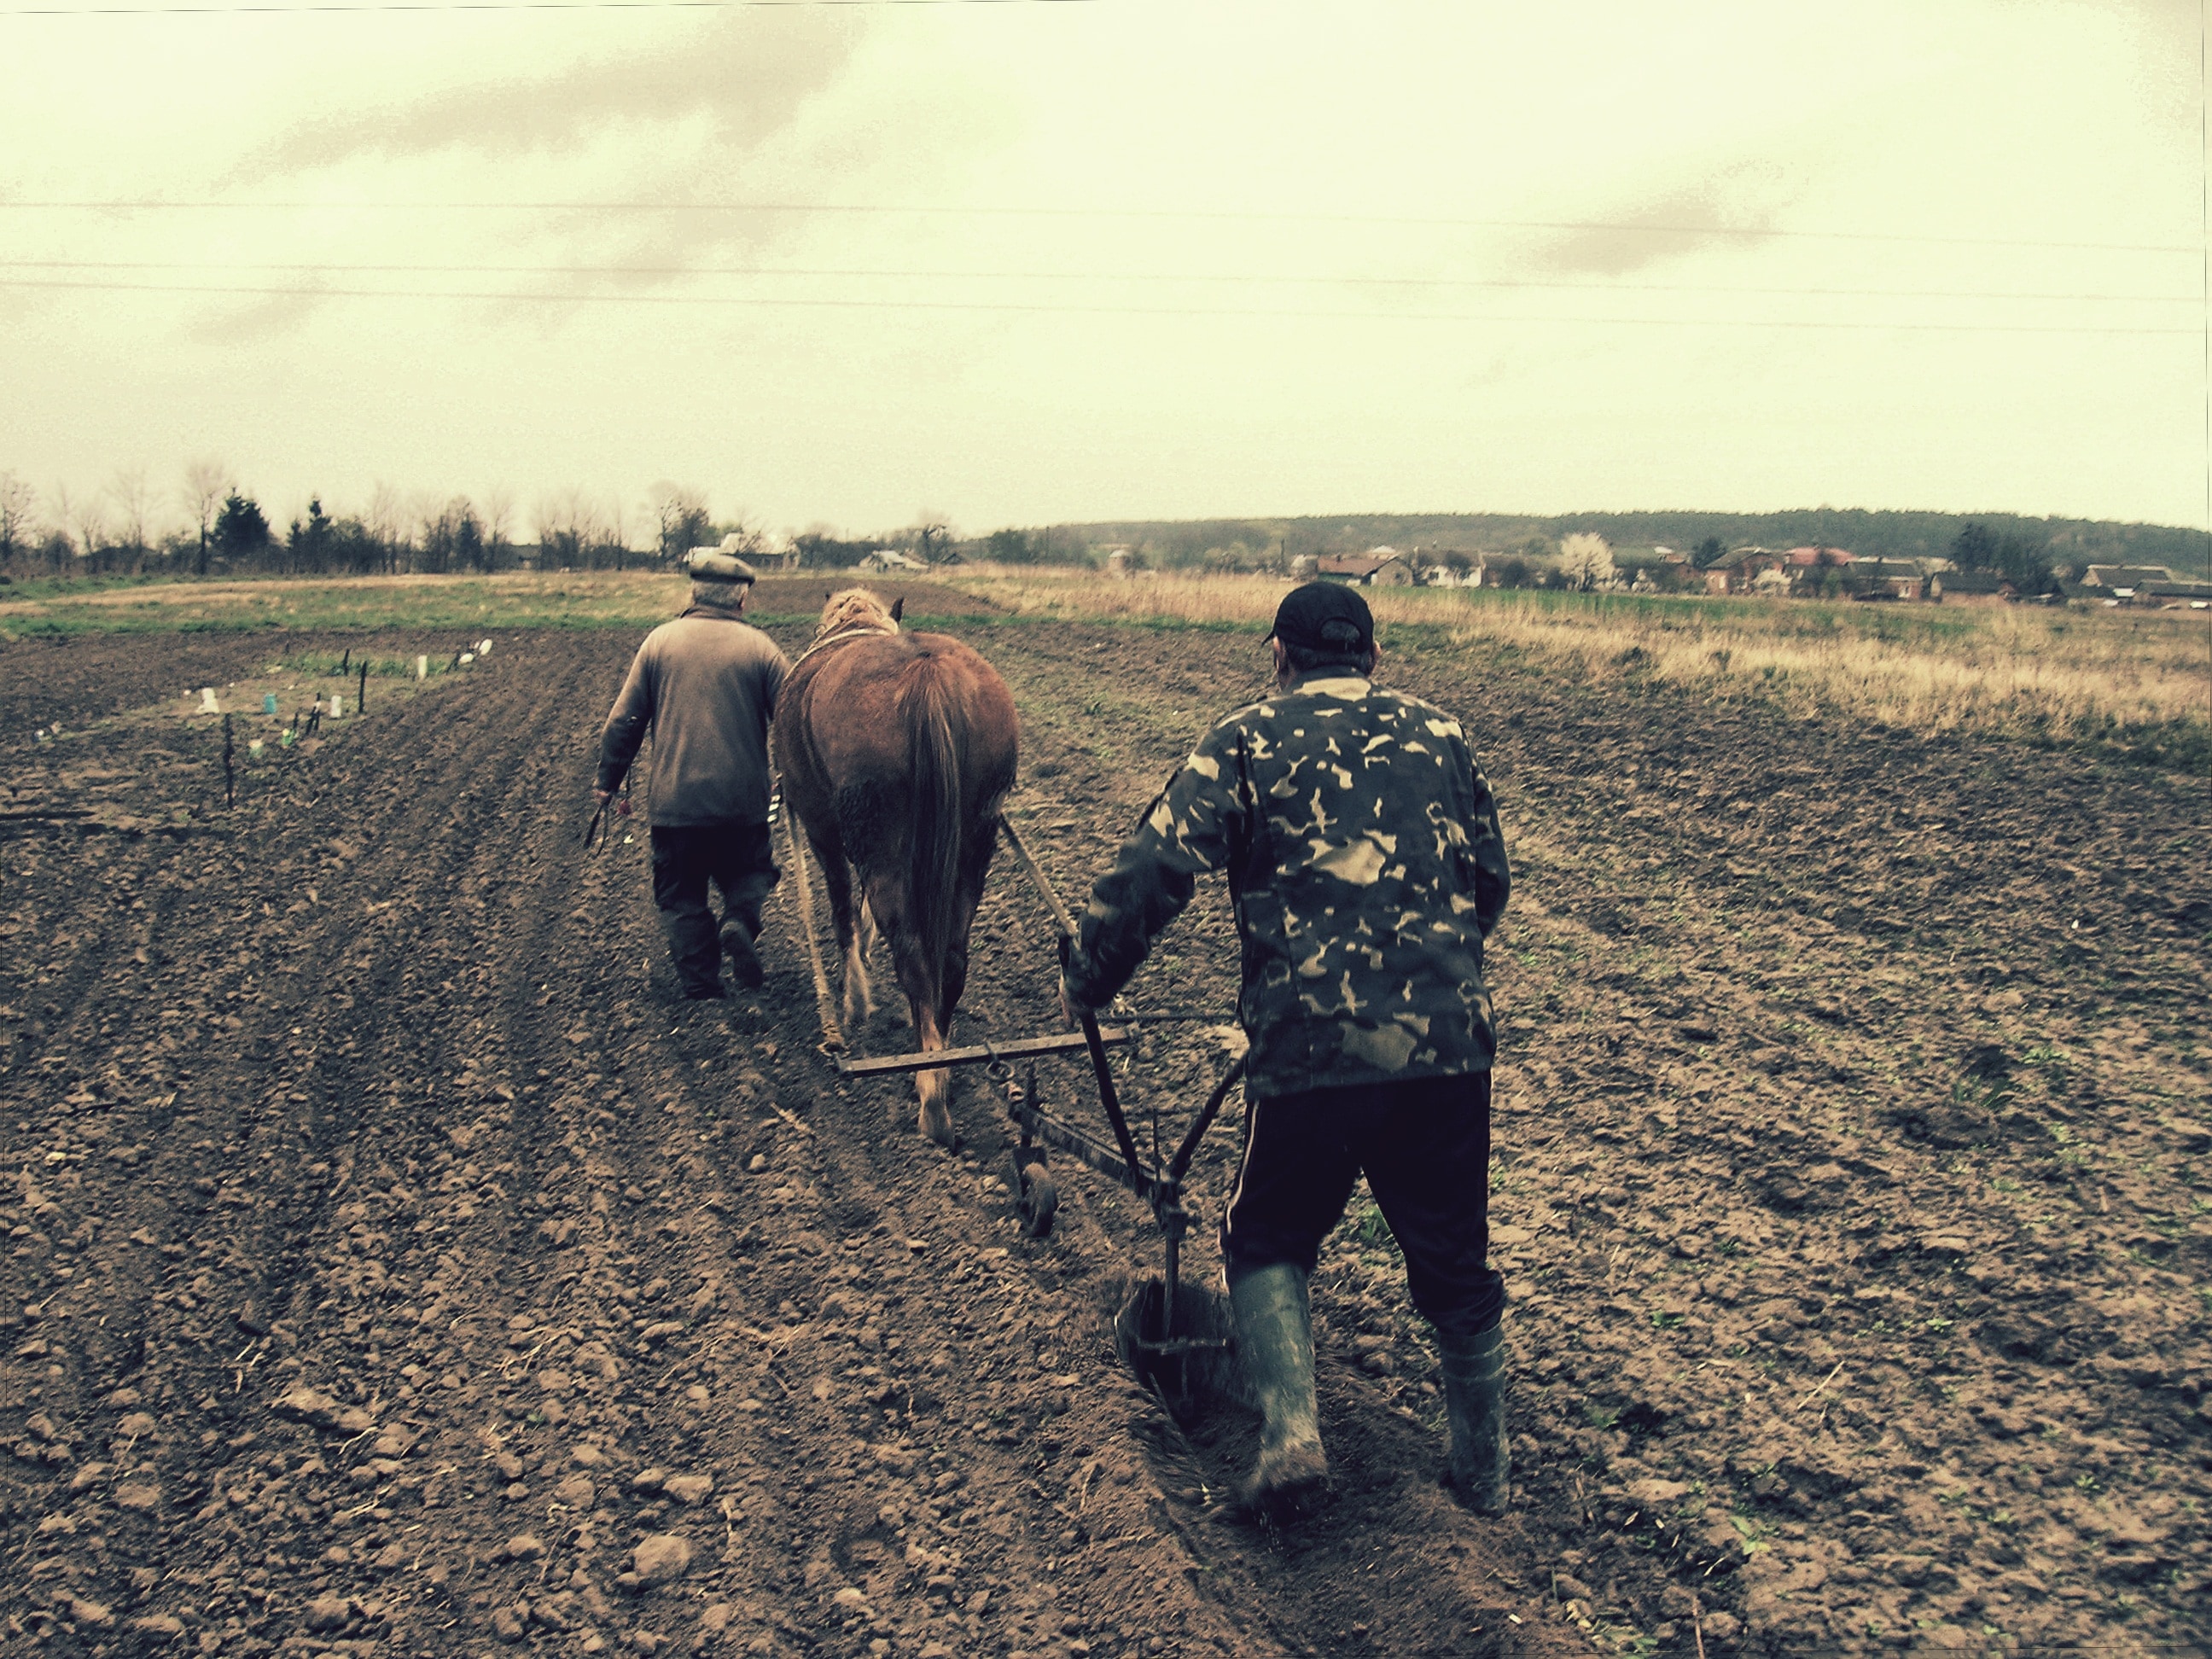 two men with horse cultivating soil at daytime